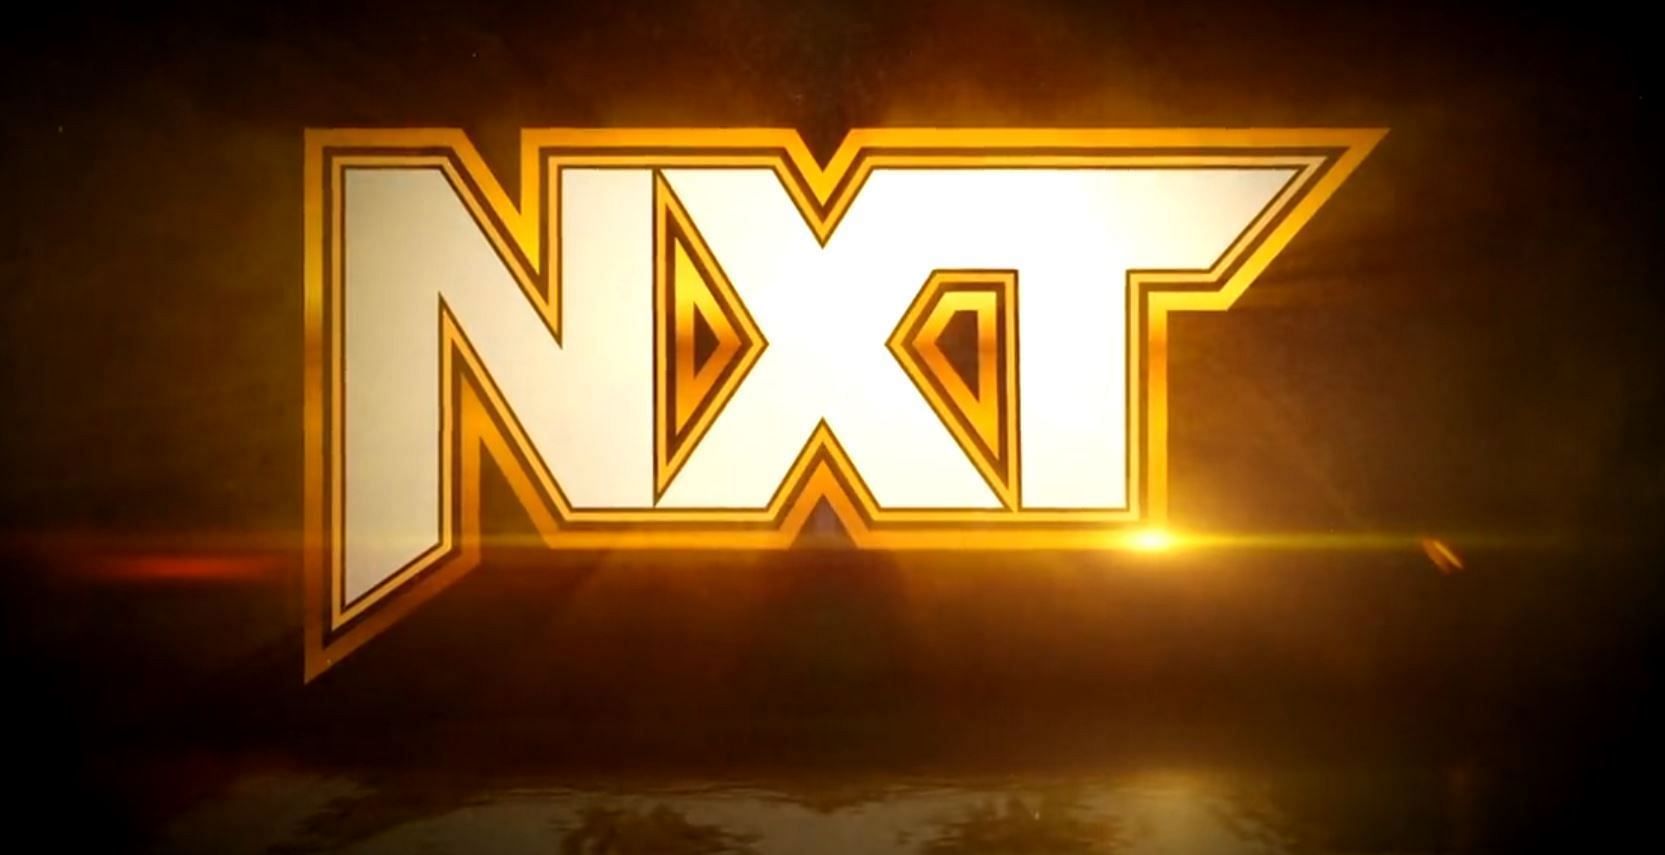 NXT will soon be the white and gold brand 